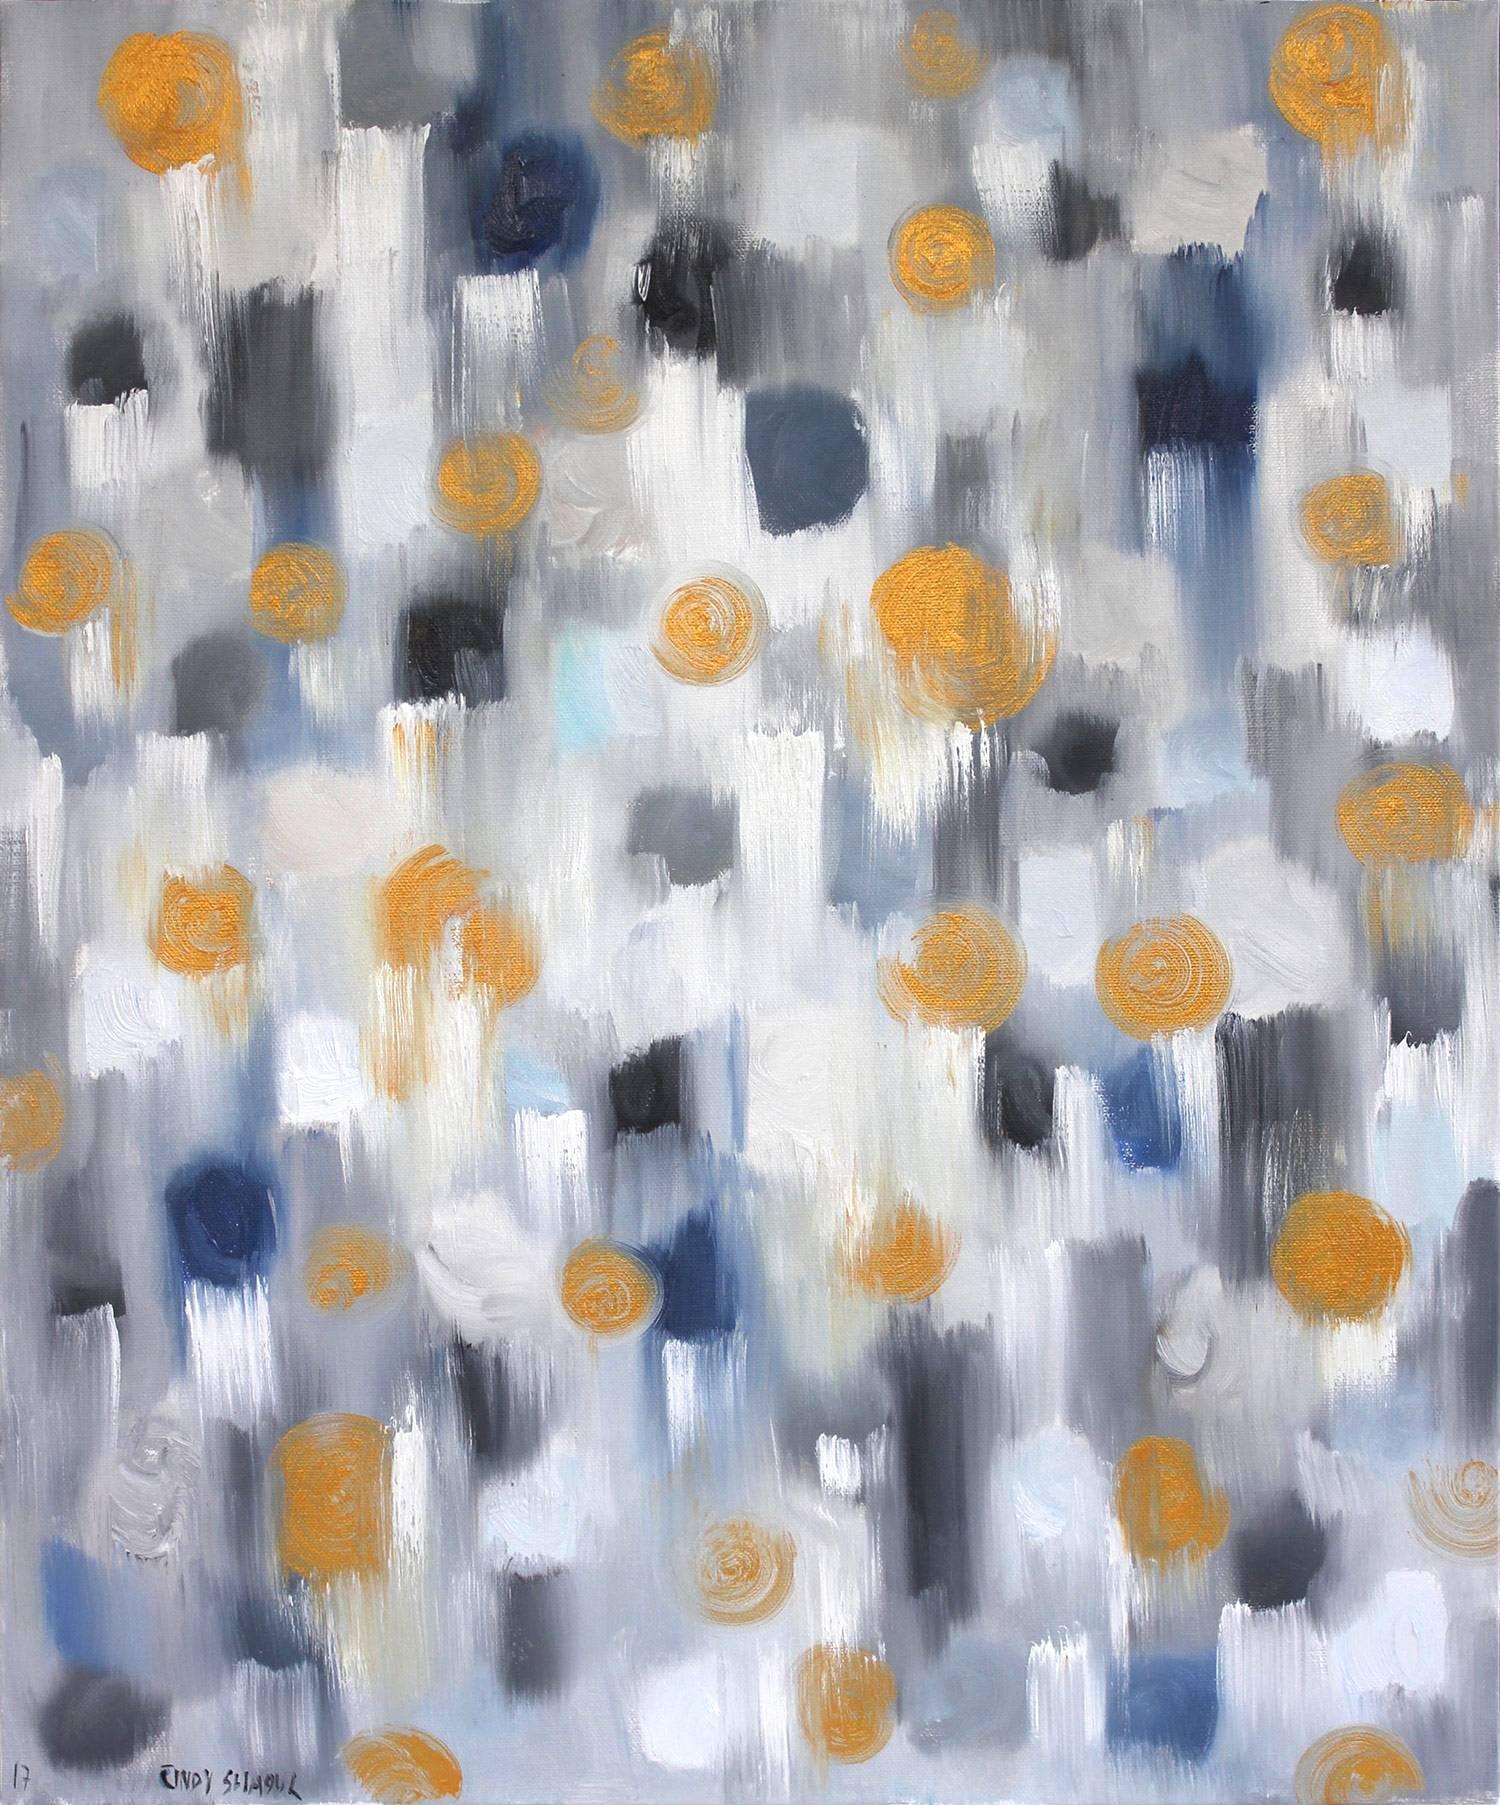 Cindy Shaoul Abstract Painting - Dripping Dots, Gold Peaks